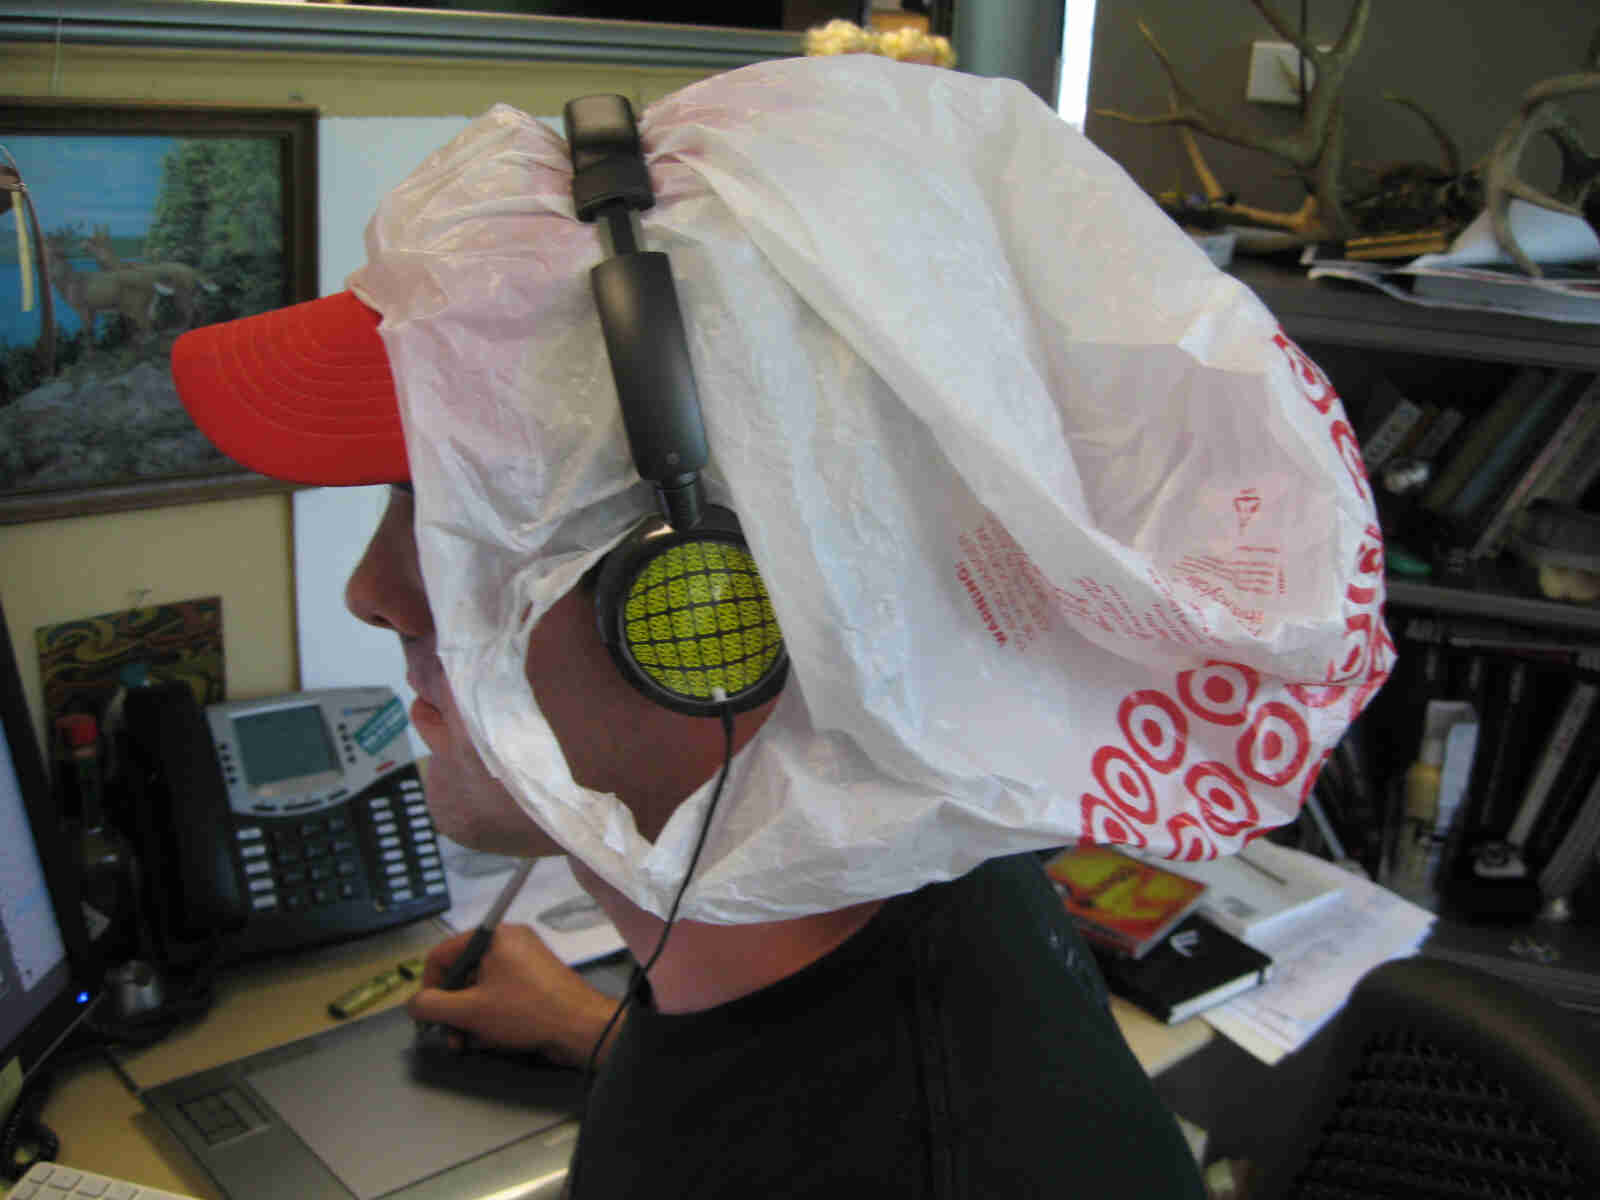 Left headshot of a person sitting at an office desk, wearing a plastic shopping bag on their head and headphones